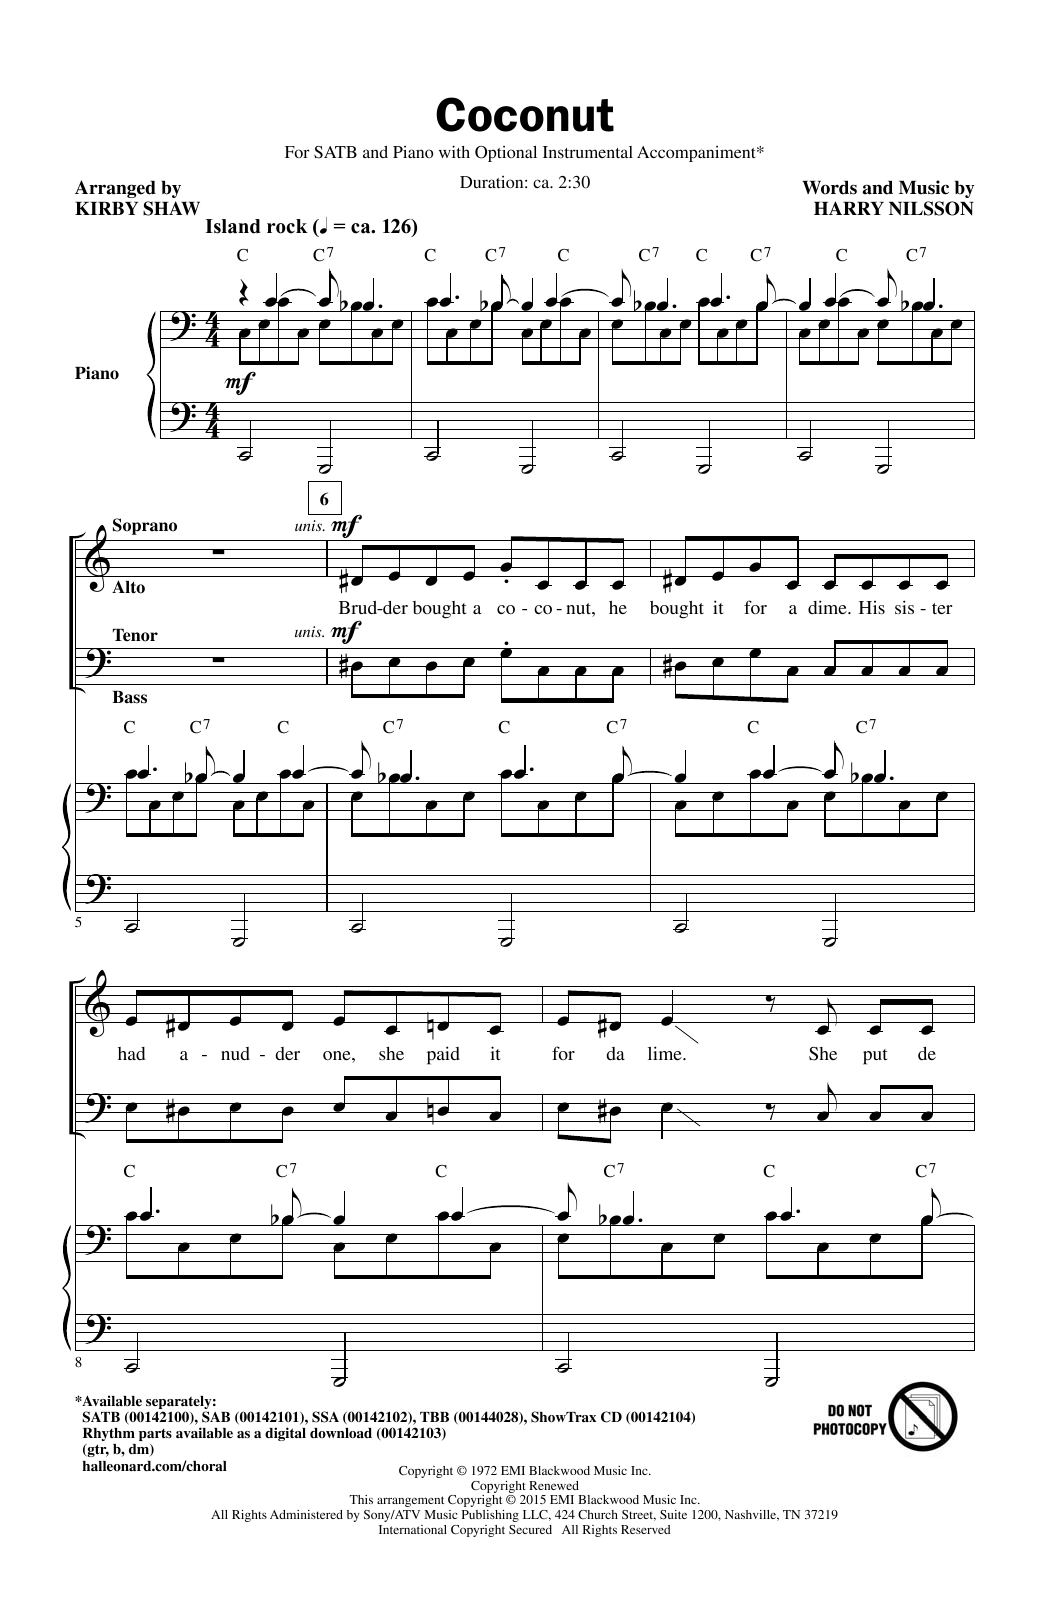 Download Harry Nilsson Coconut (arr. Kirby Shaw) Sheet Music